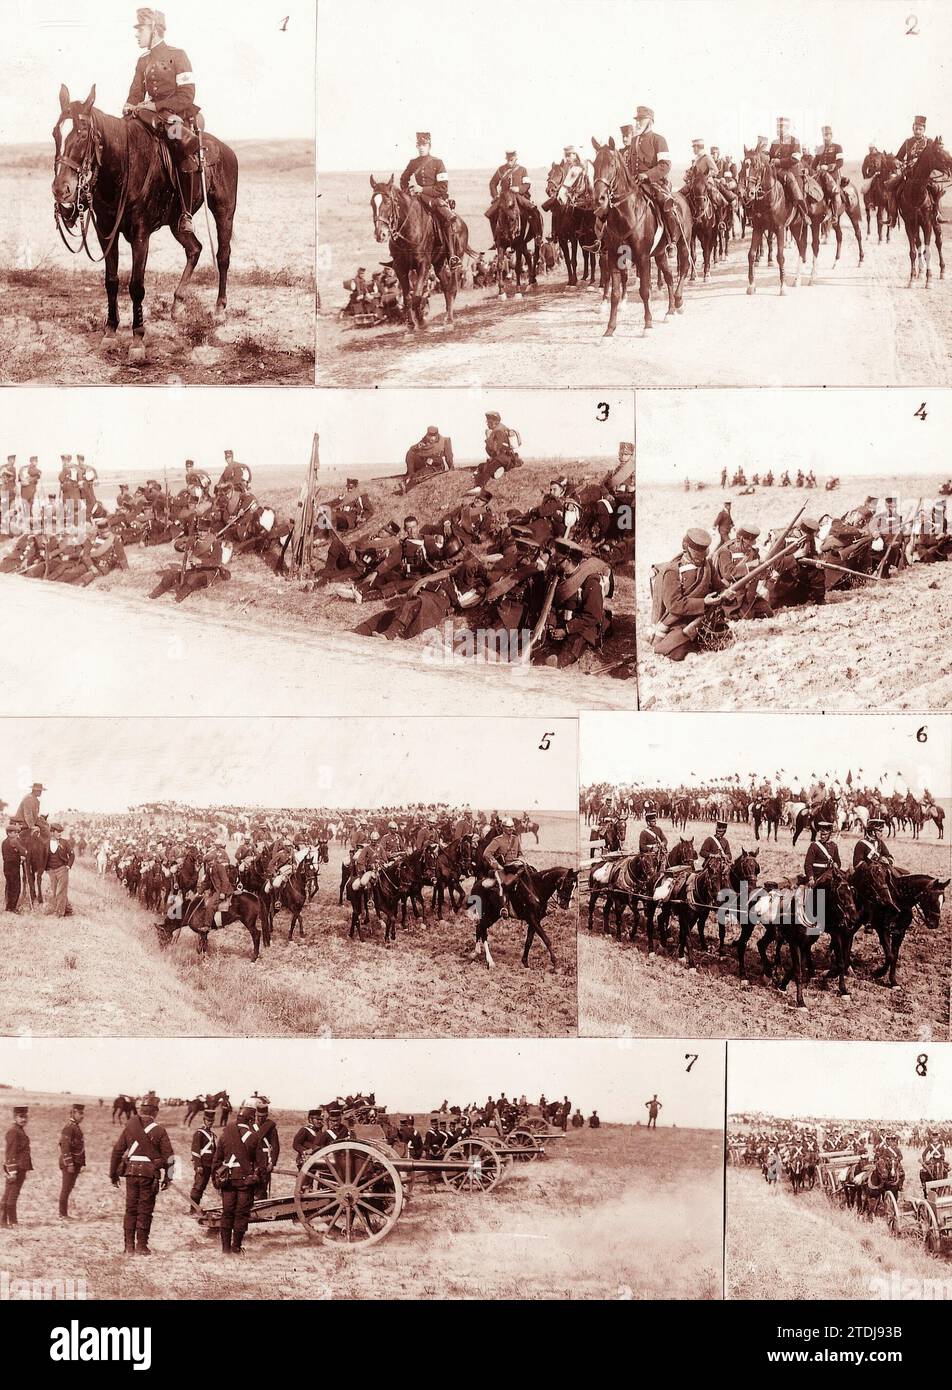 09/30/1906. Maneuvers of the first corps of the Army. (1) HM the King in Maneuvers, (2) Don Alfonso Xiii and the Minister of War with his General Staff. (3) a halt on the March, (4) fire in Guerrillas, (5) a regiment of Cavalry, (6) artillery and Lancers, (7) the artillery in Functions, (8) the parade. Credit: Album / Archivo ABC / Francisco Goñi Stock Photo